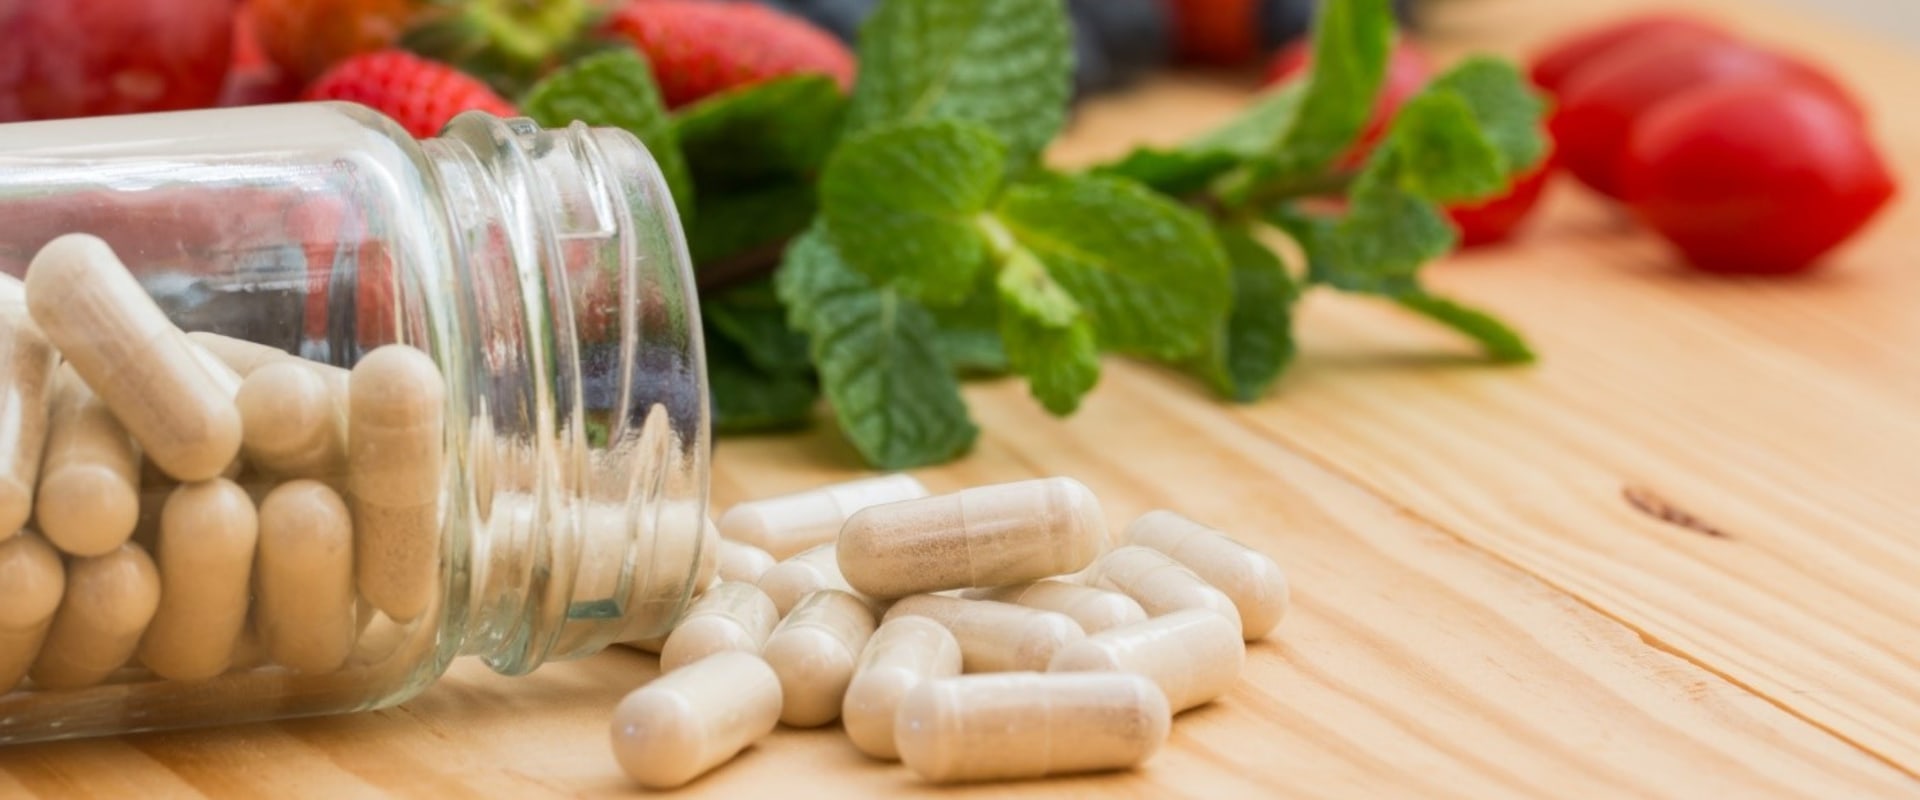 The Benefits of Taking Dietary Supplements